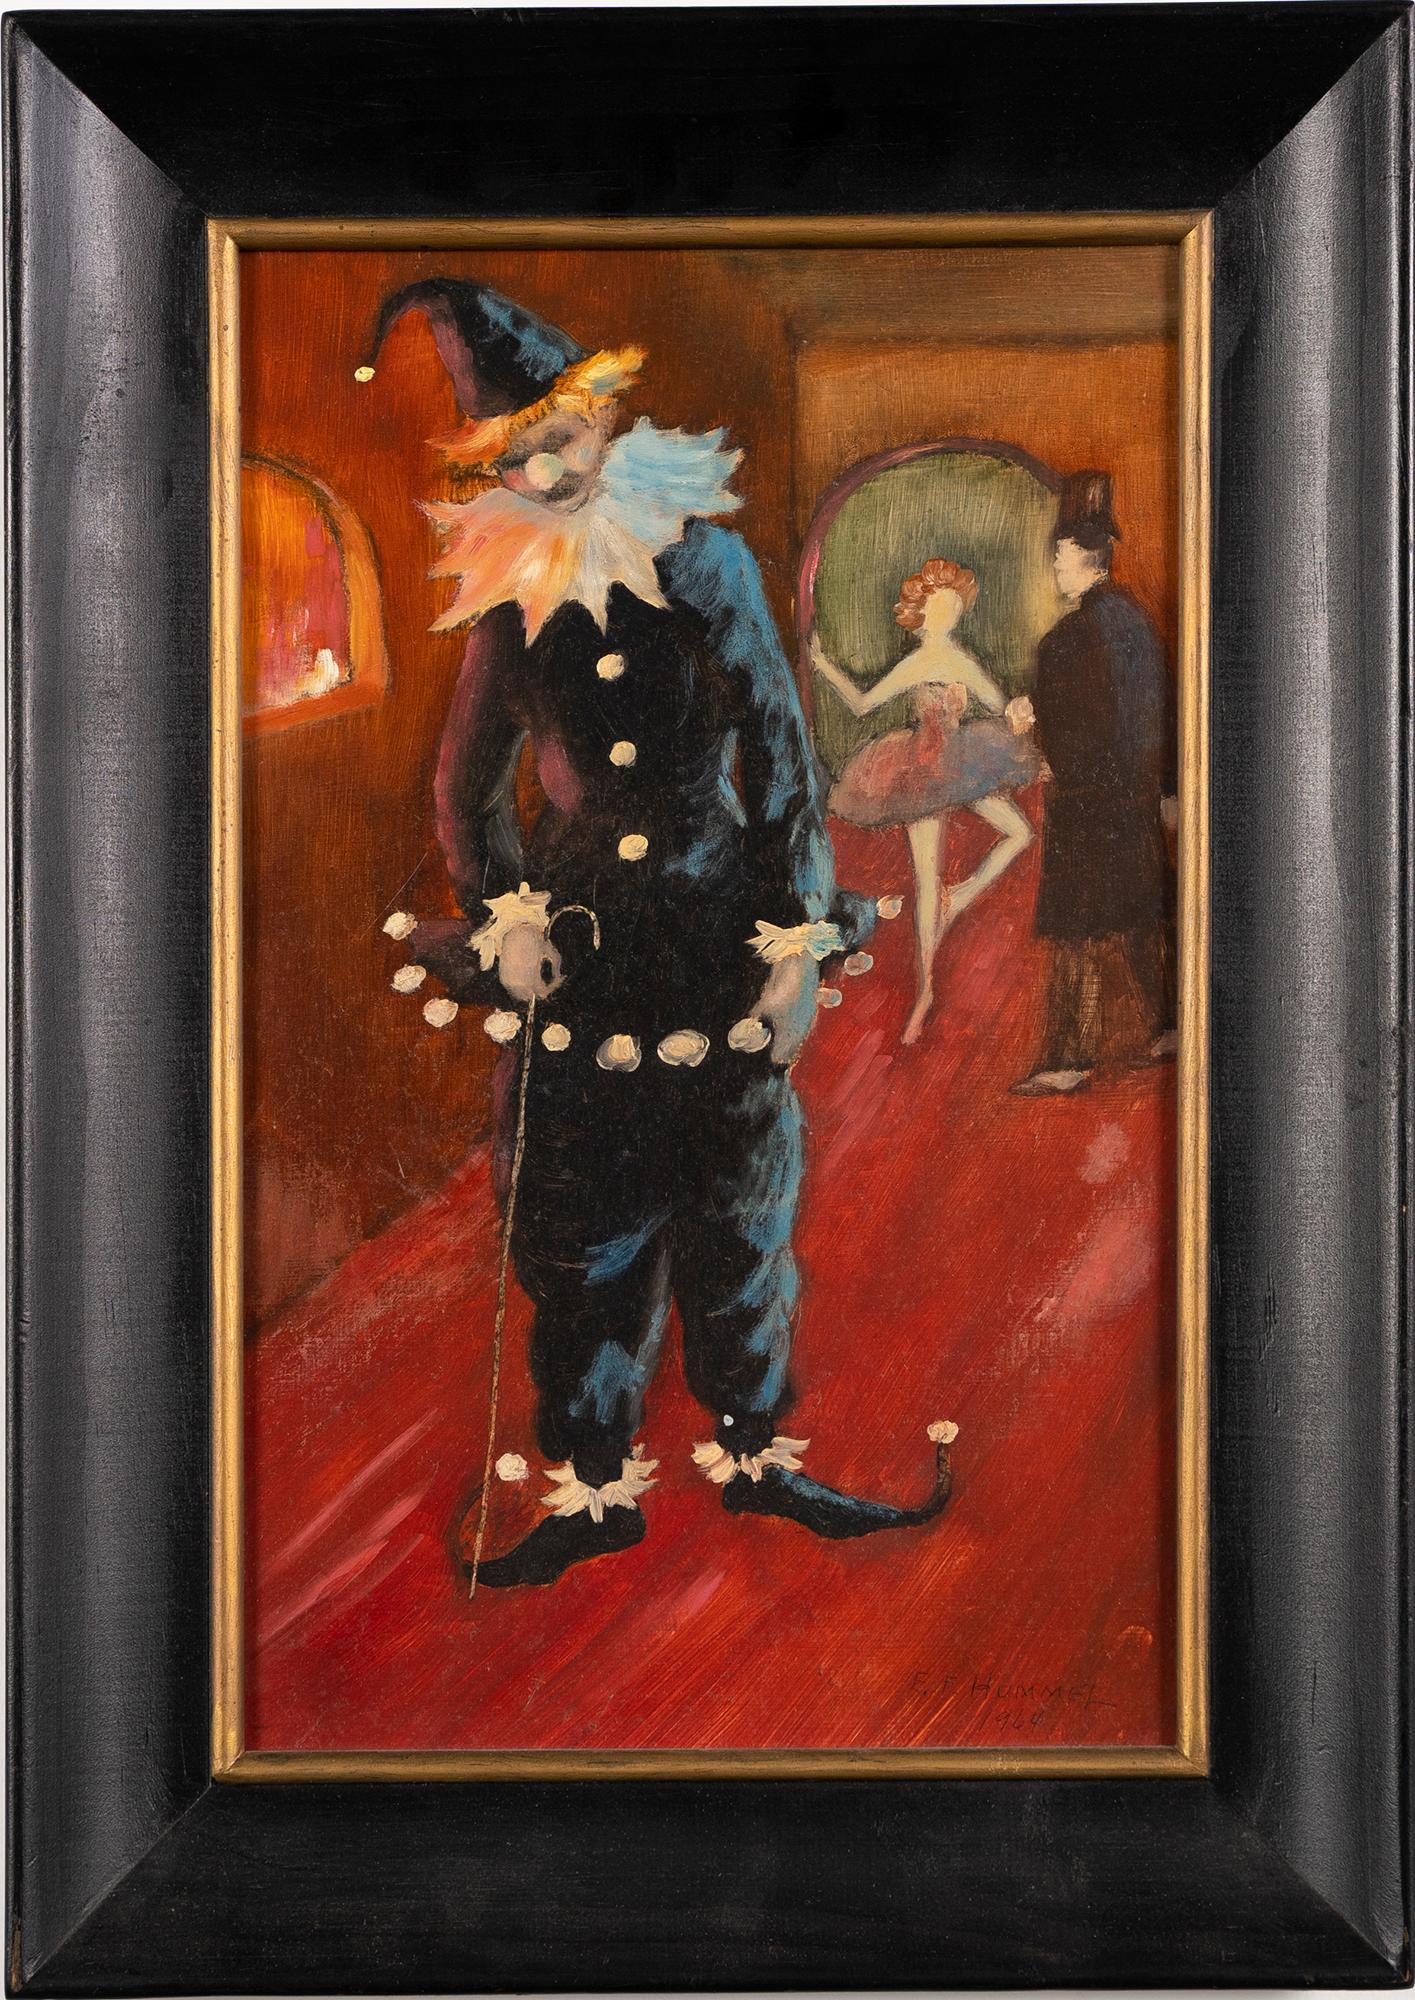 Unknown Portrait Painting - Vintage Clown Comedy "The Loser" Genre Scene Interior Signed Oil Painting 